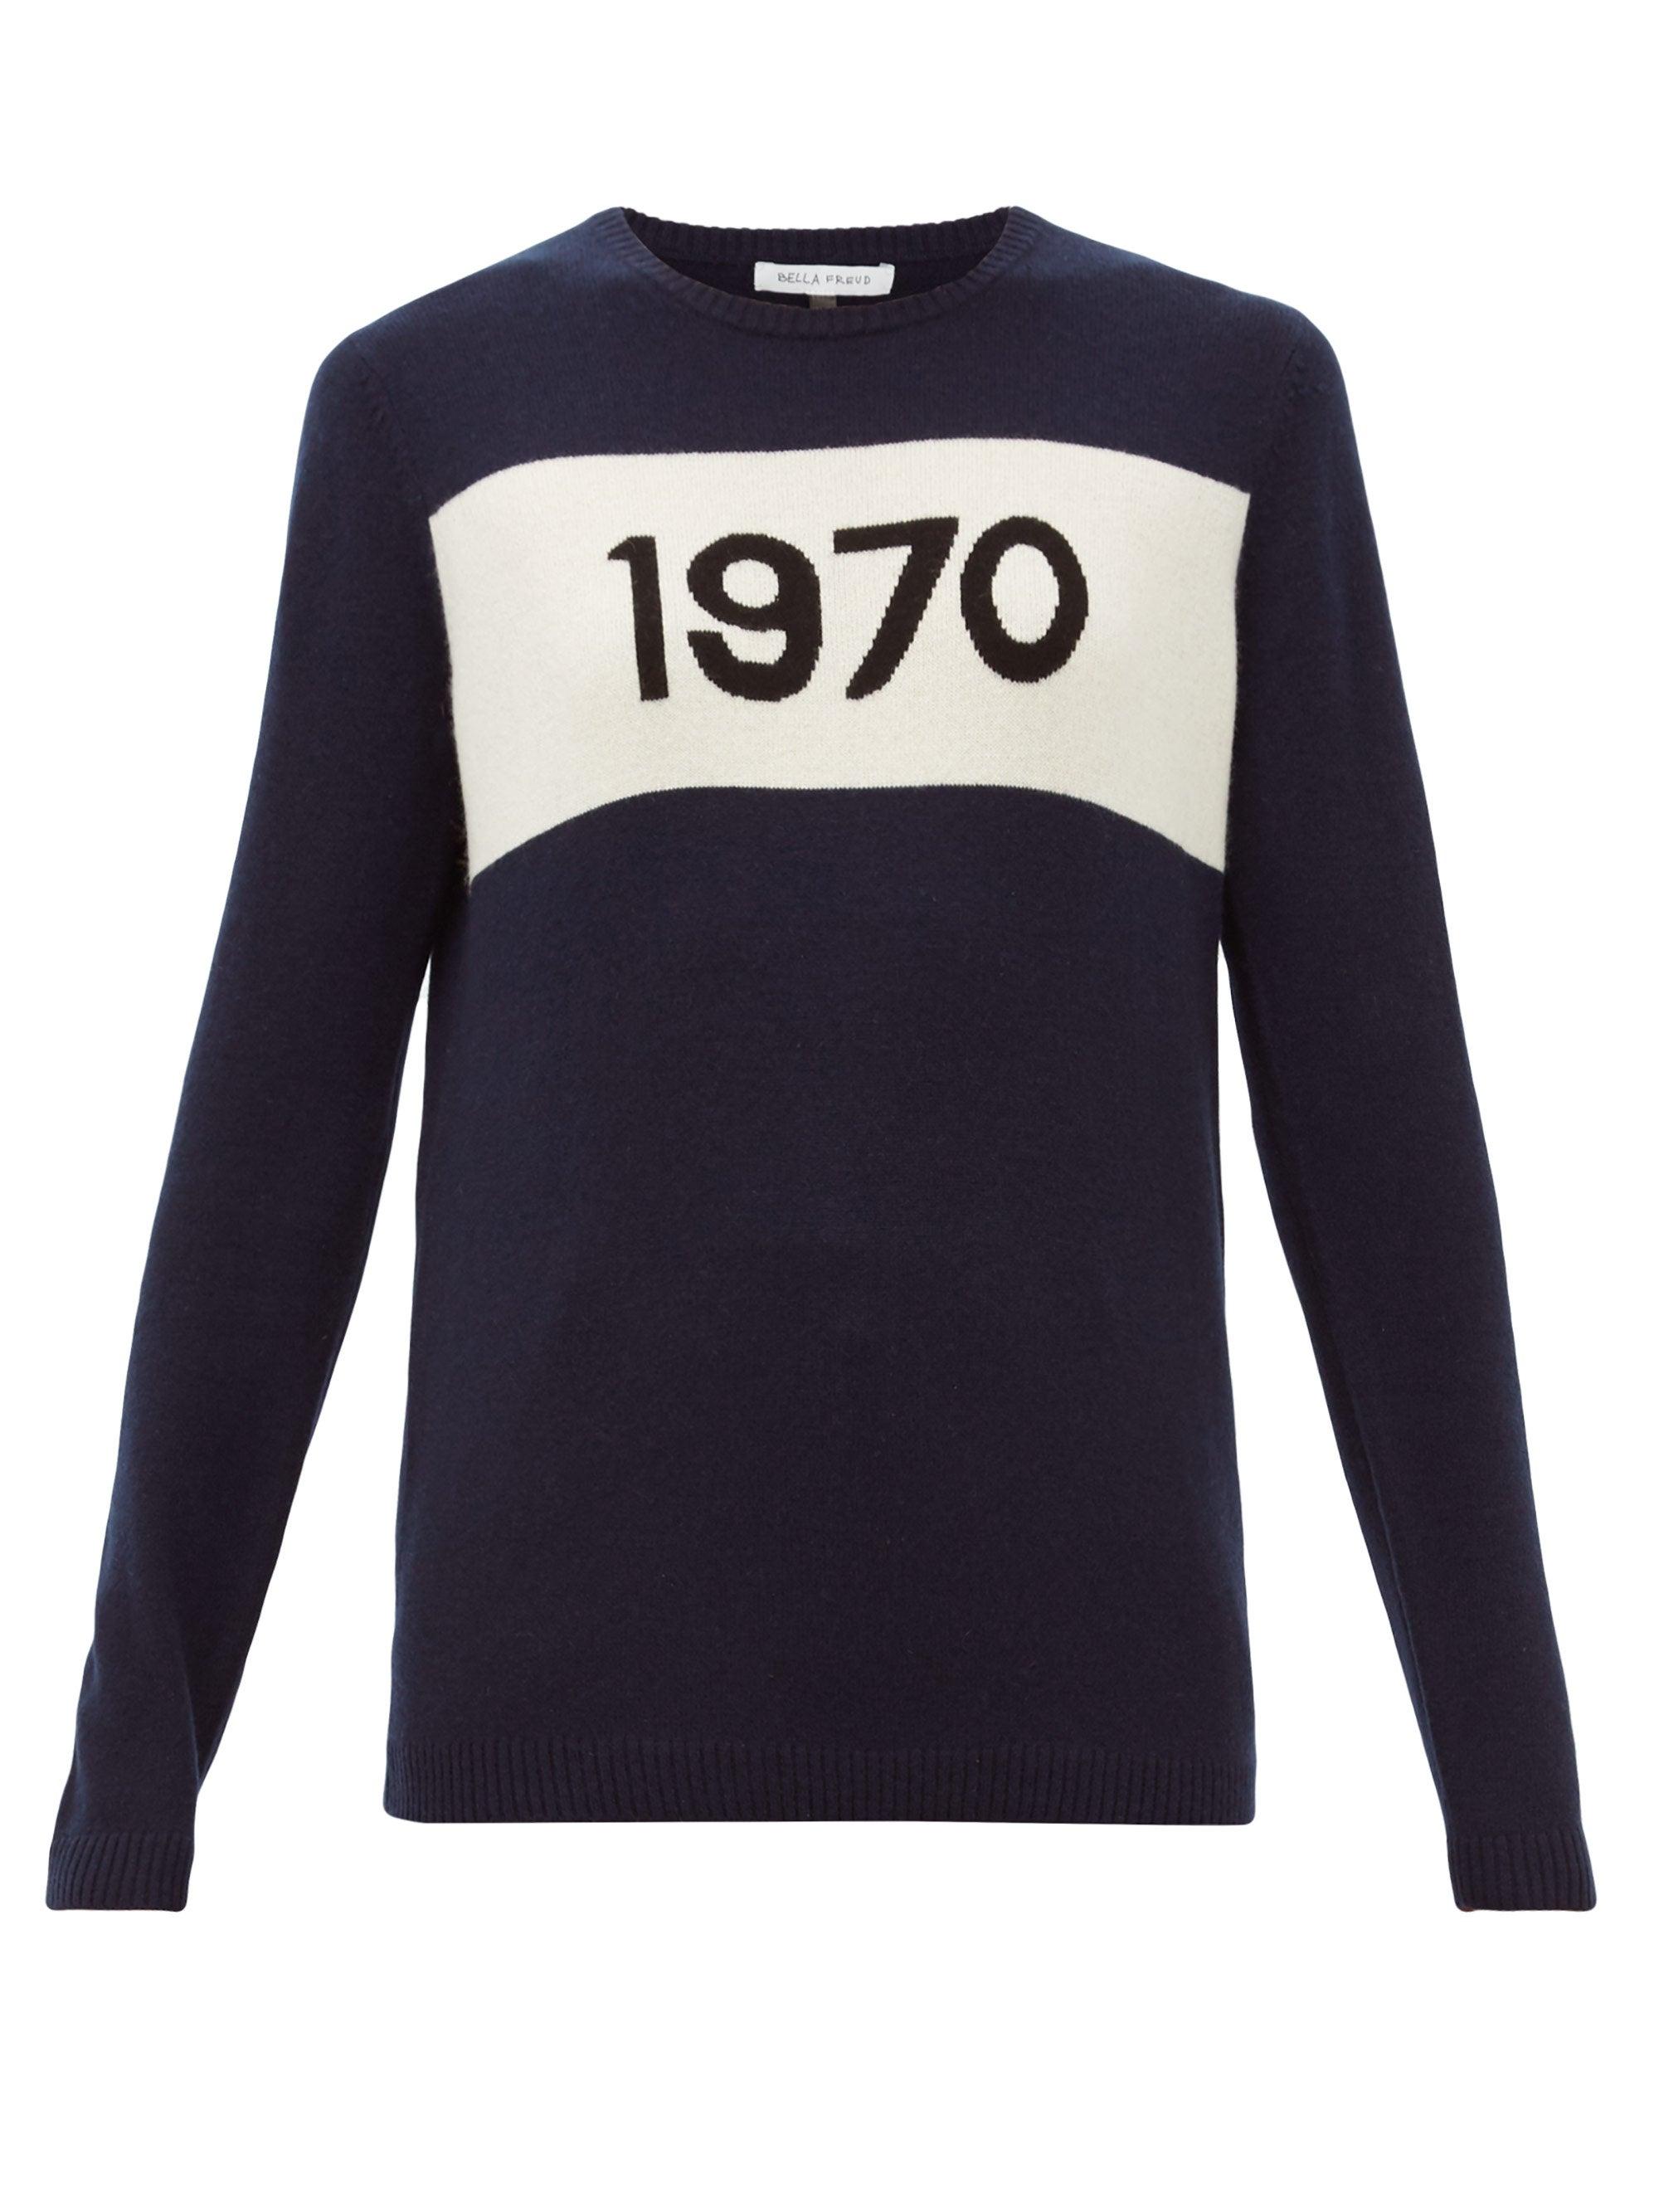 Bella Freud 1970-intarsia Cashmere Sweater in Navy (Blue) - Lyst